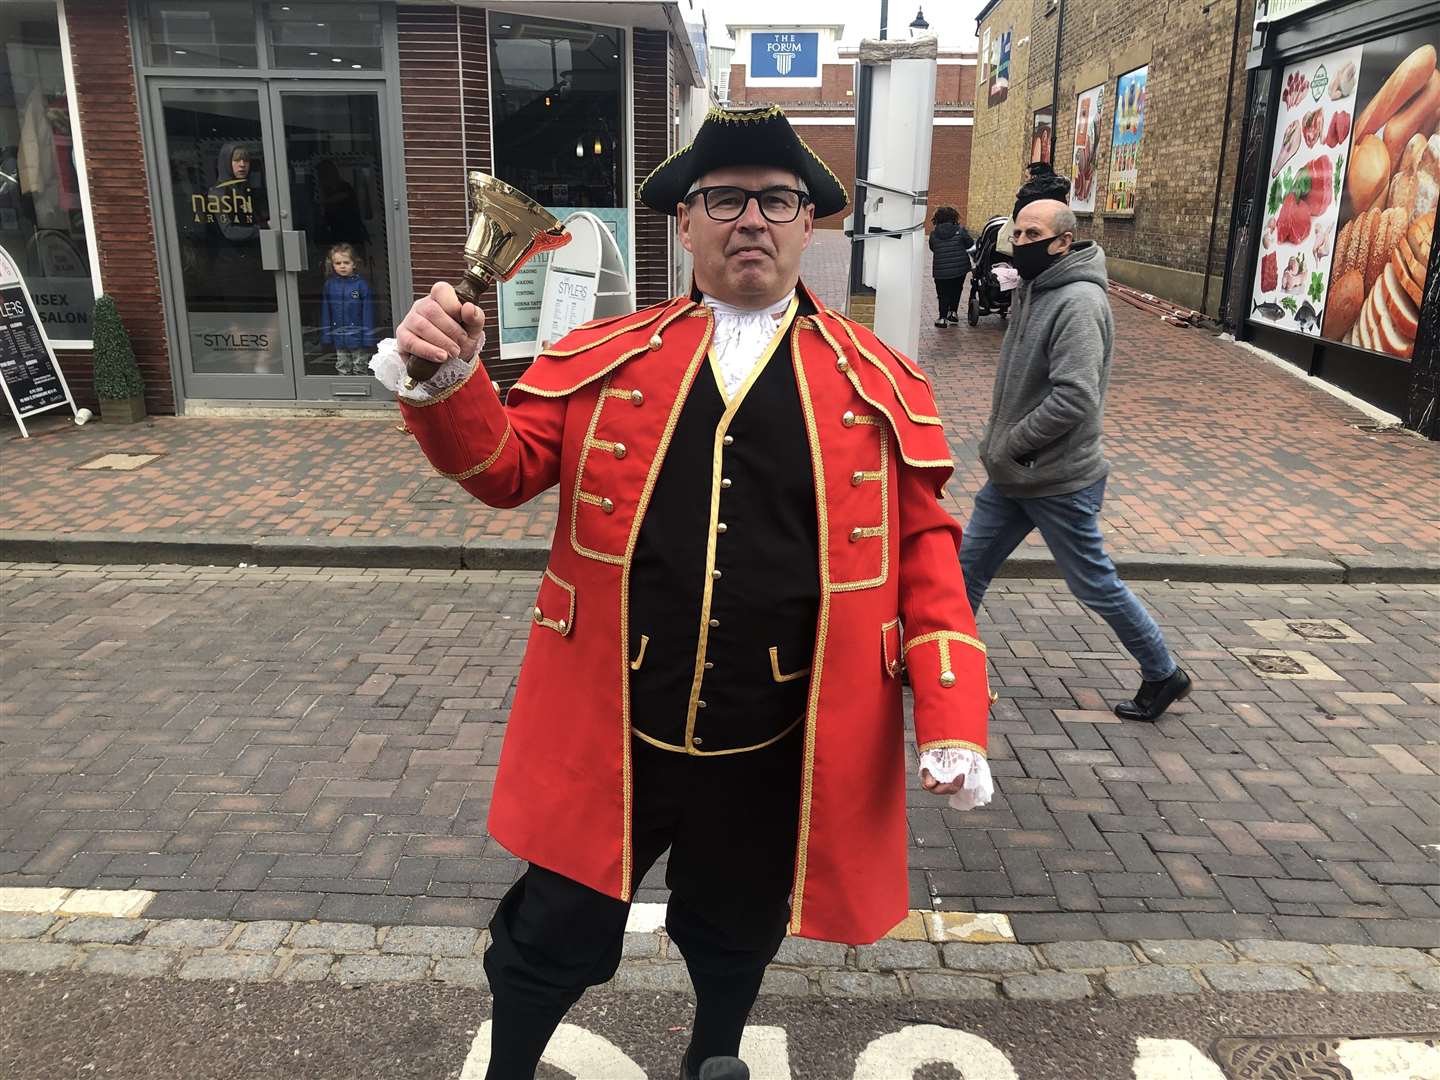 Sittingbourne town crier Richard Spooner was looking to spread some positivity